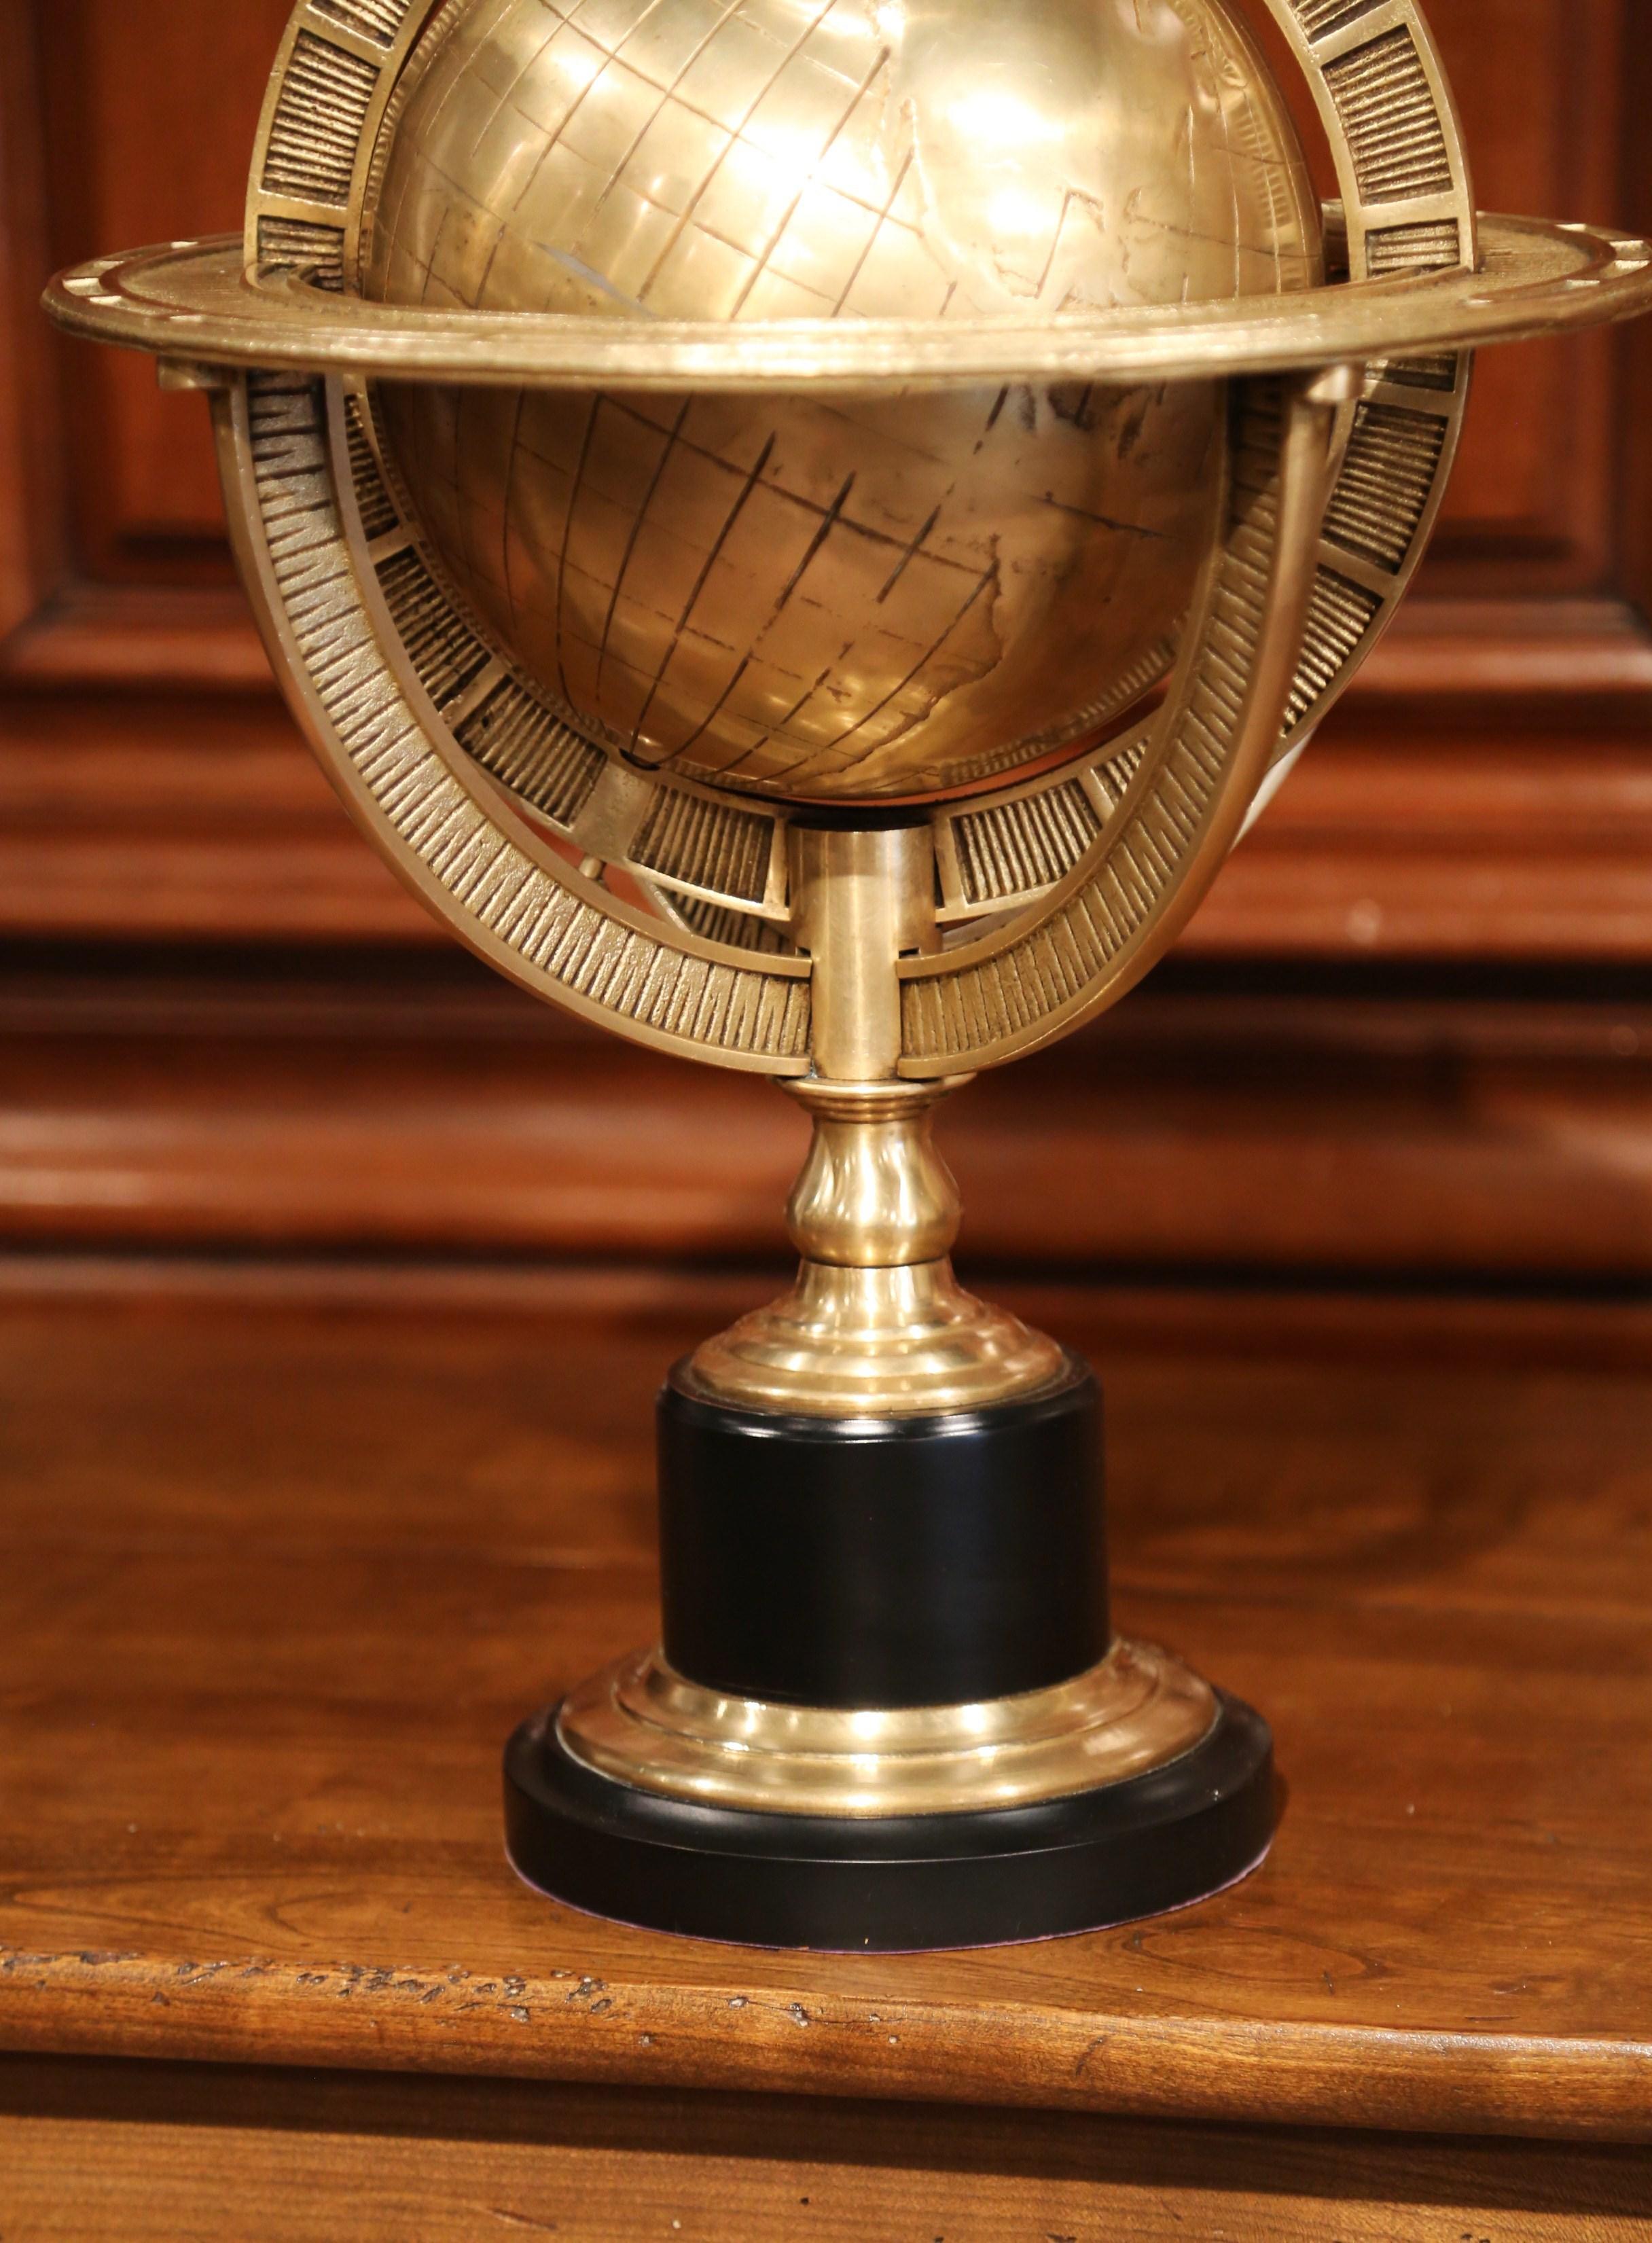 Painted Mid-20th Century Bronze Globe on Wooden Stand